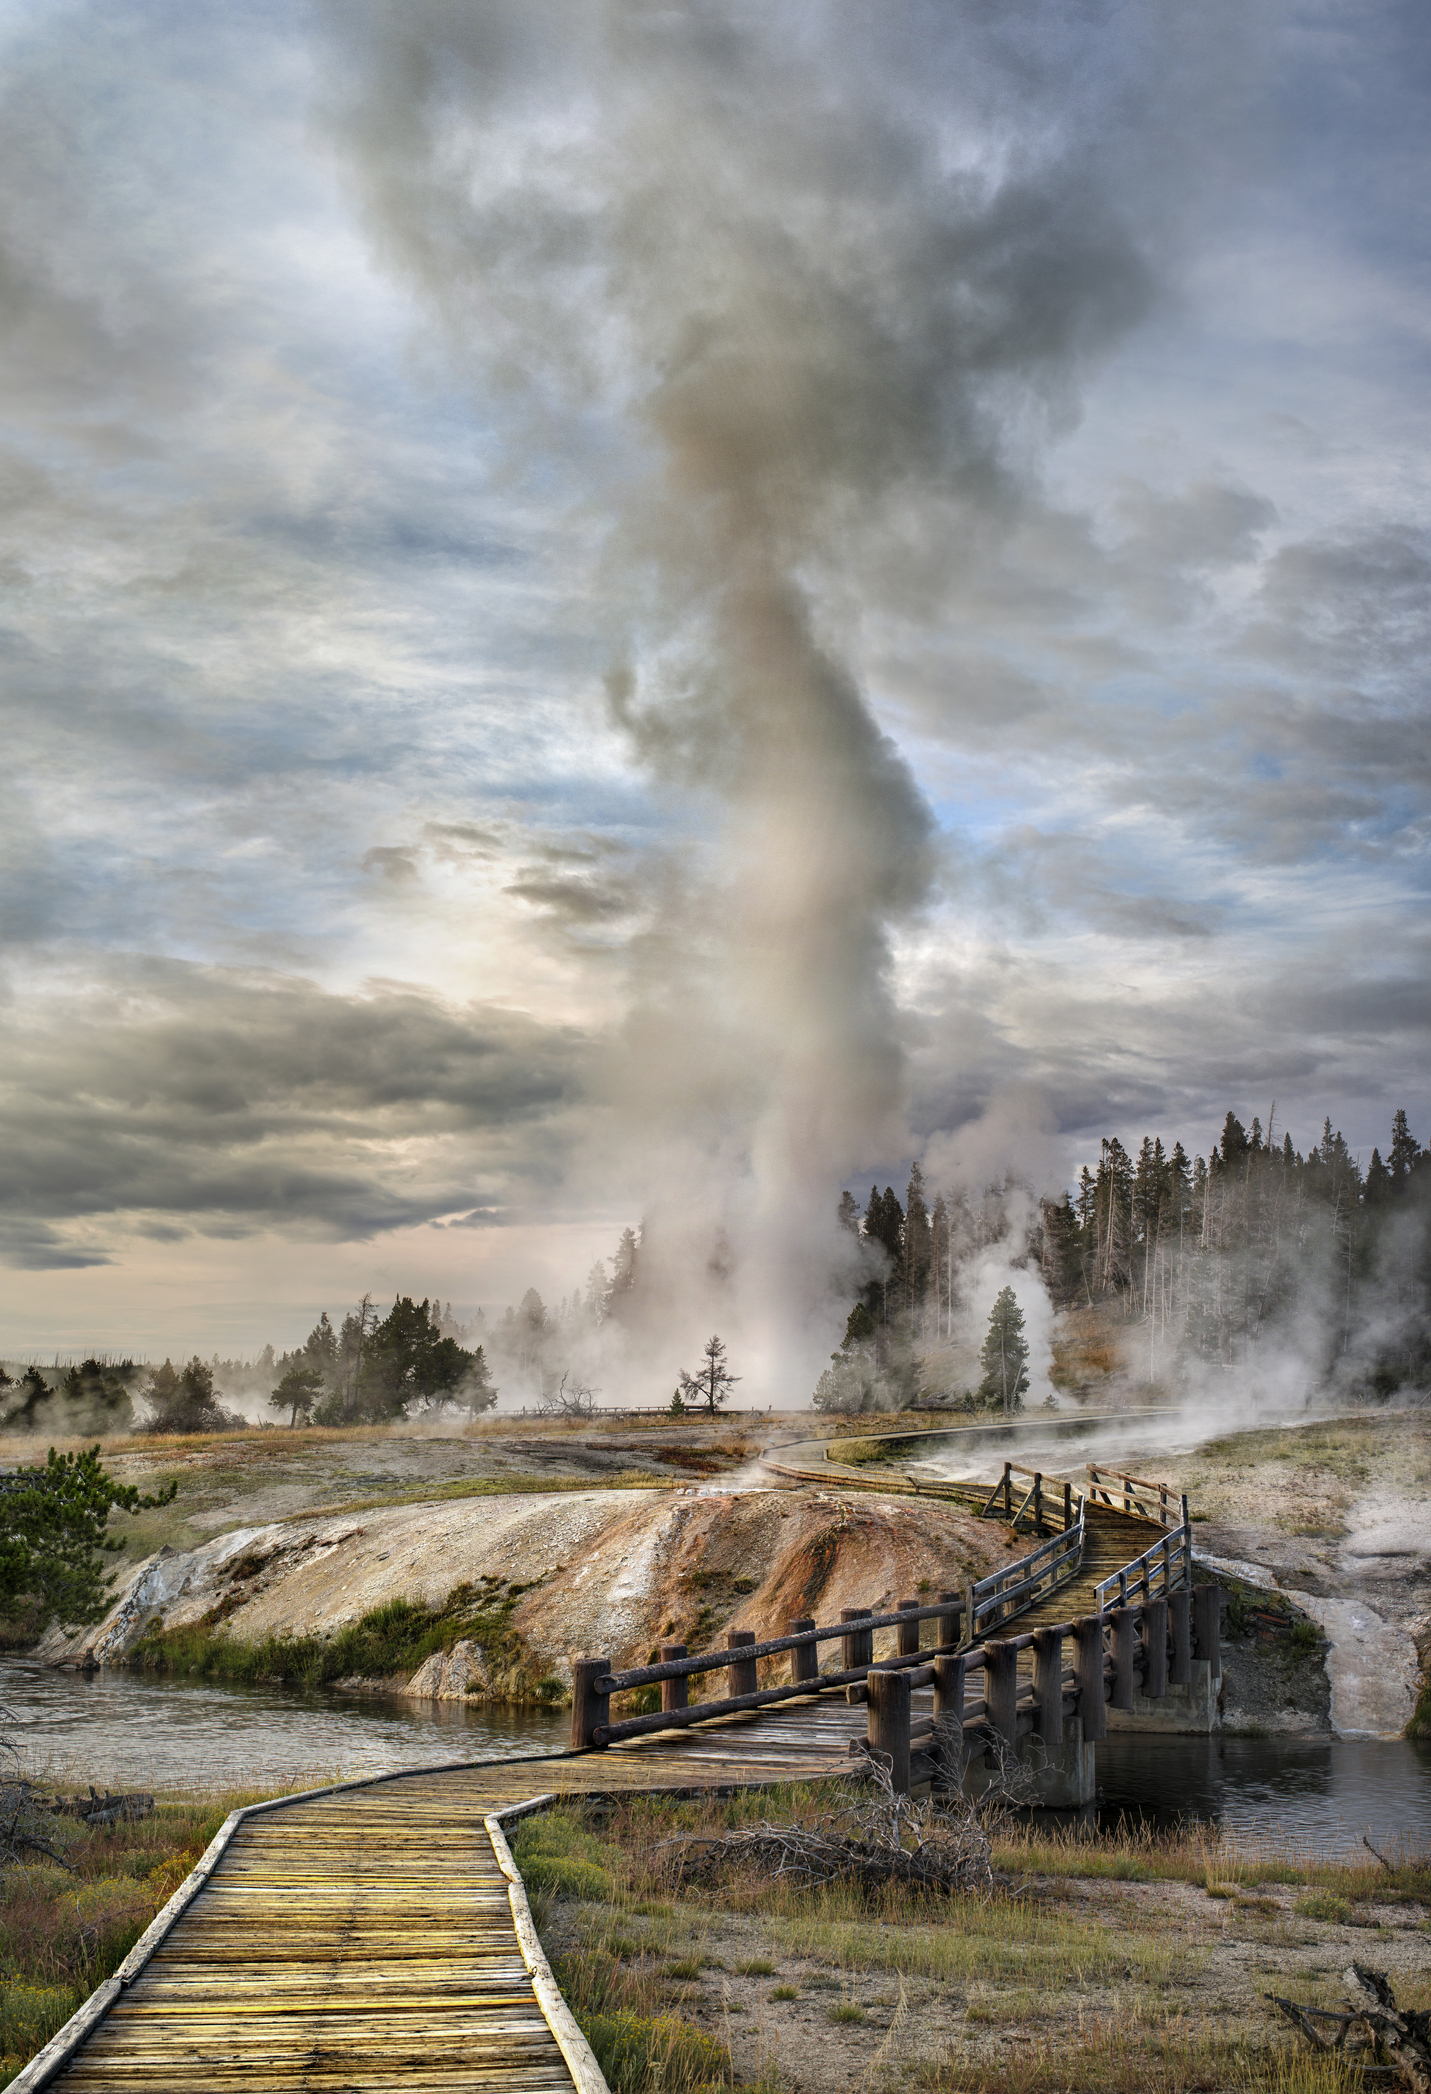 An active geyser at Yellowstone National Park